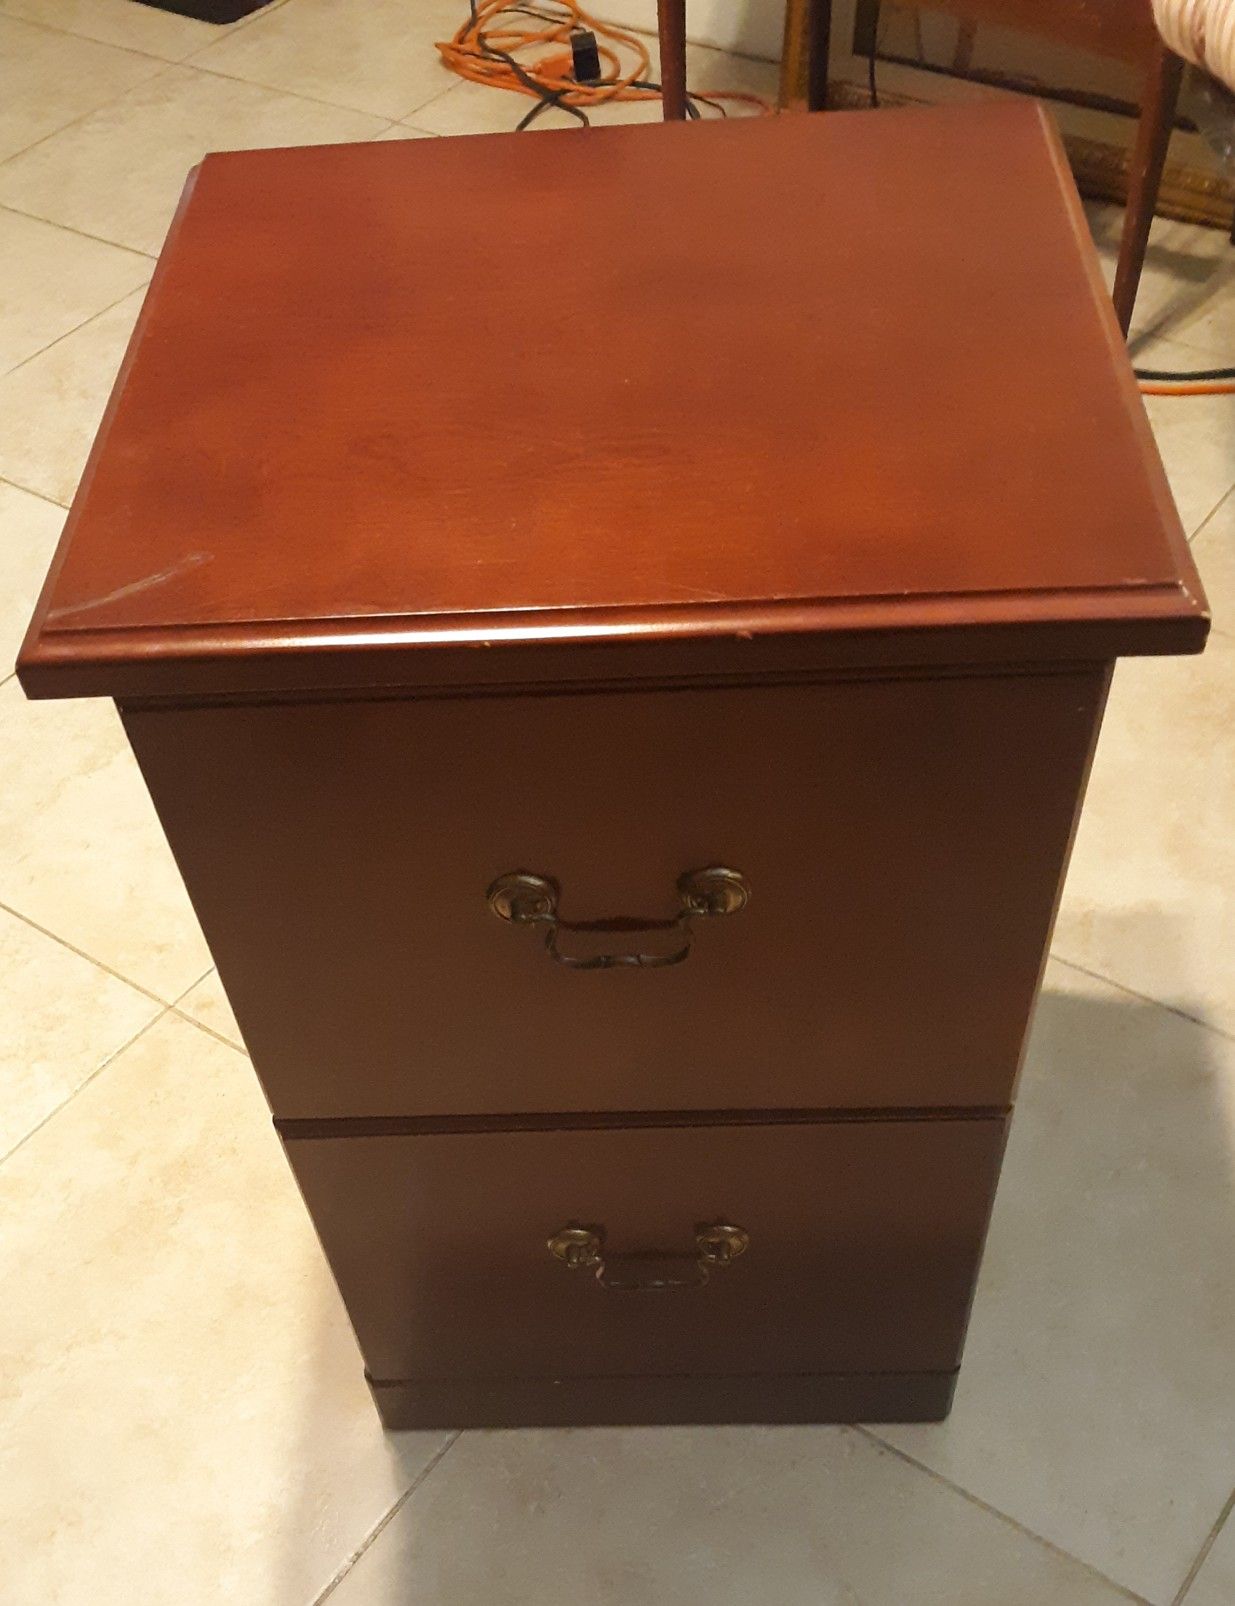 Cherry wood filing cabinet two drawers like new